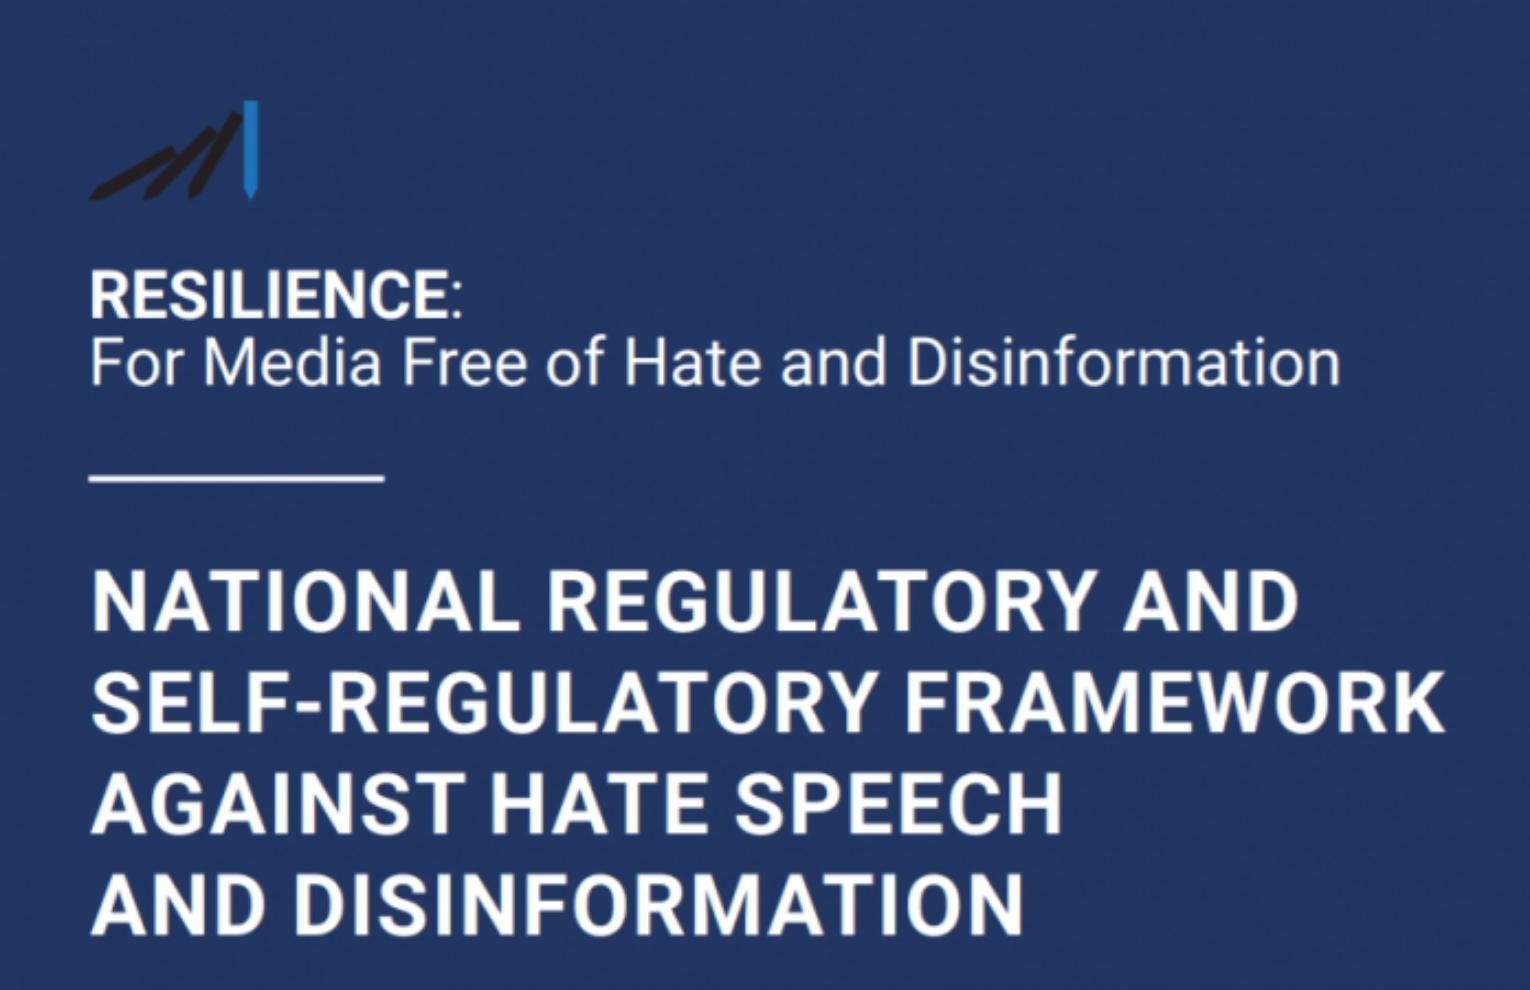 For media free of hate and disinformation